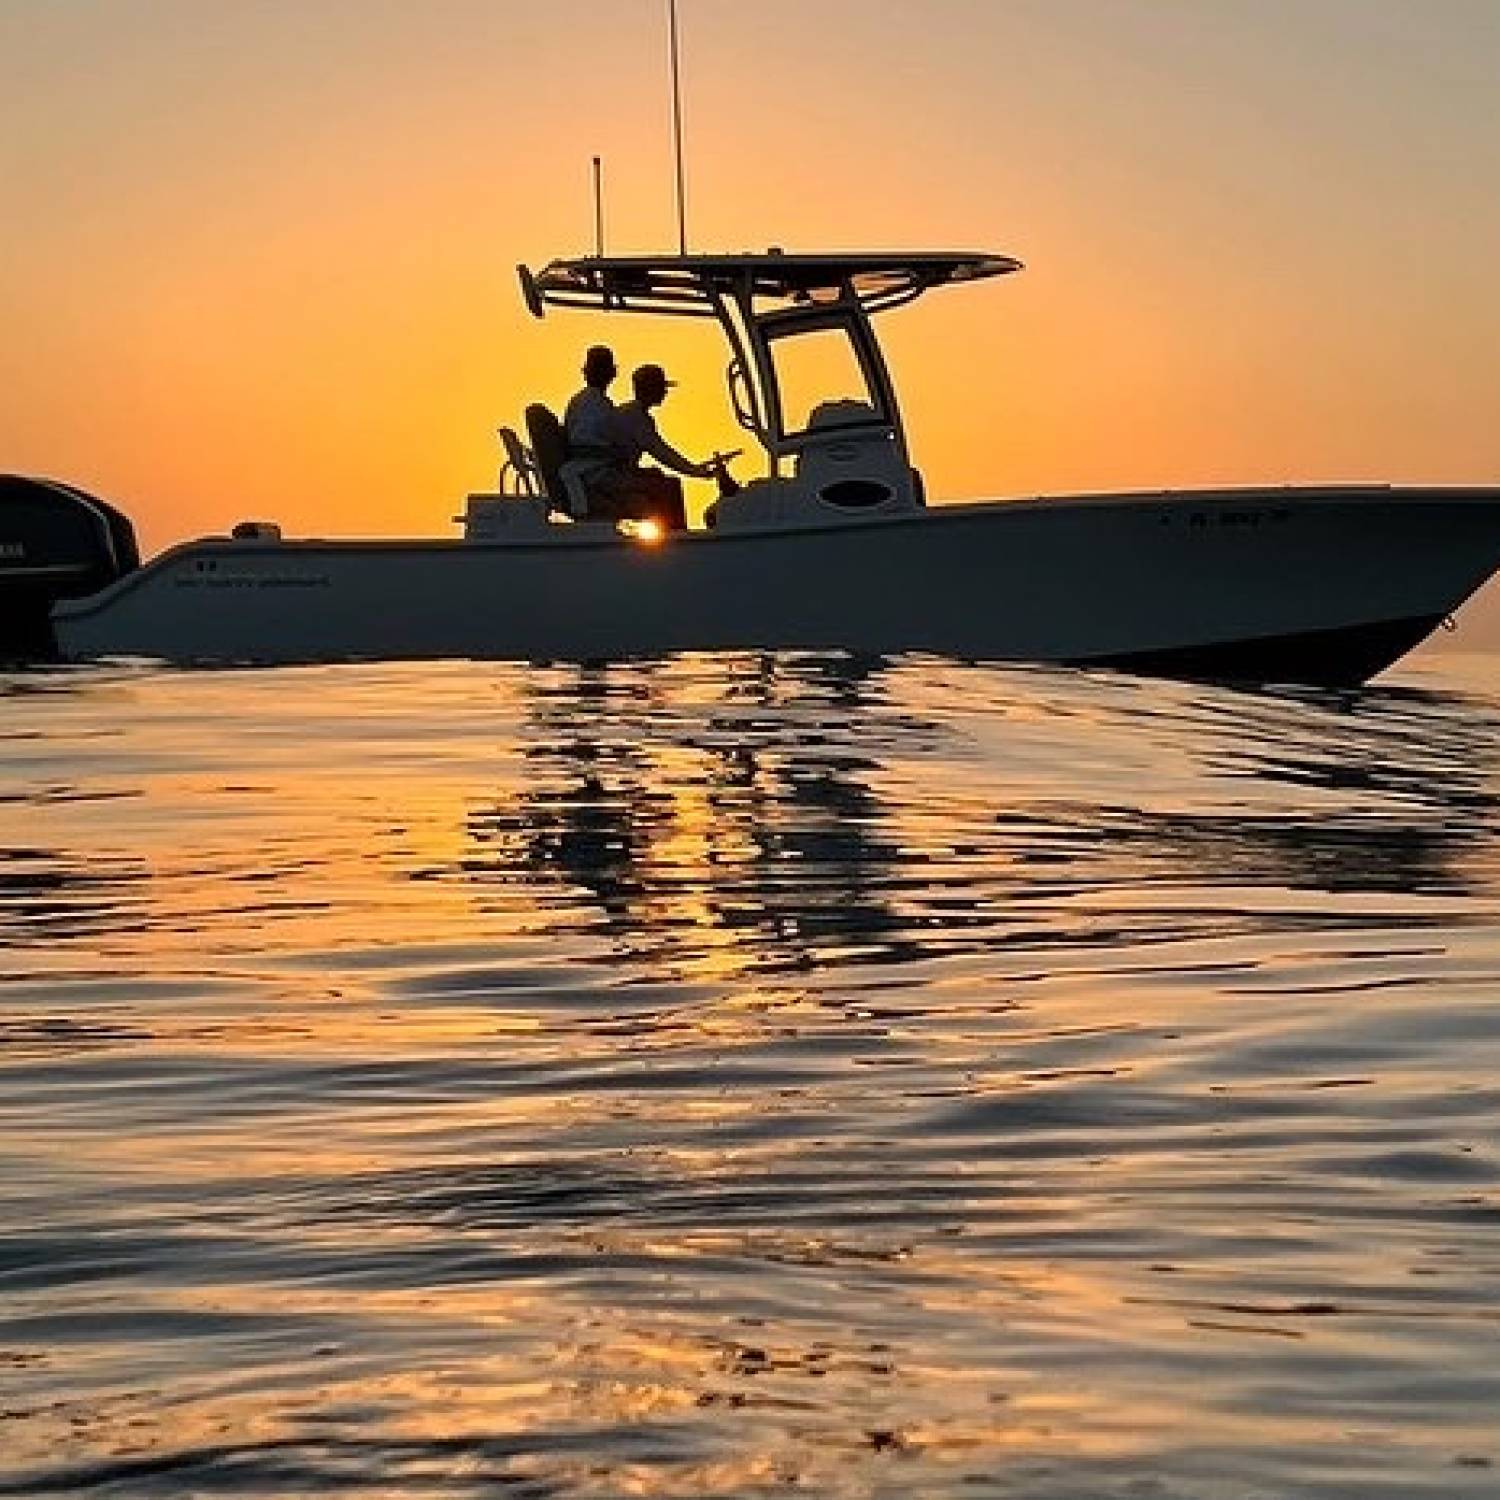 Title: Sundown Downtown - On board their Sportsman Open 282 Center Console - Location: Naples Florida. Participating in the Photo Contest #SportsmanMarch